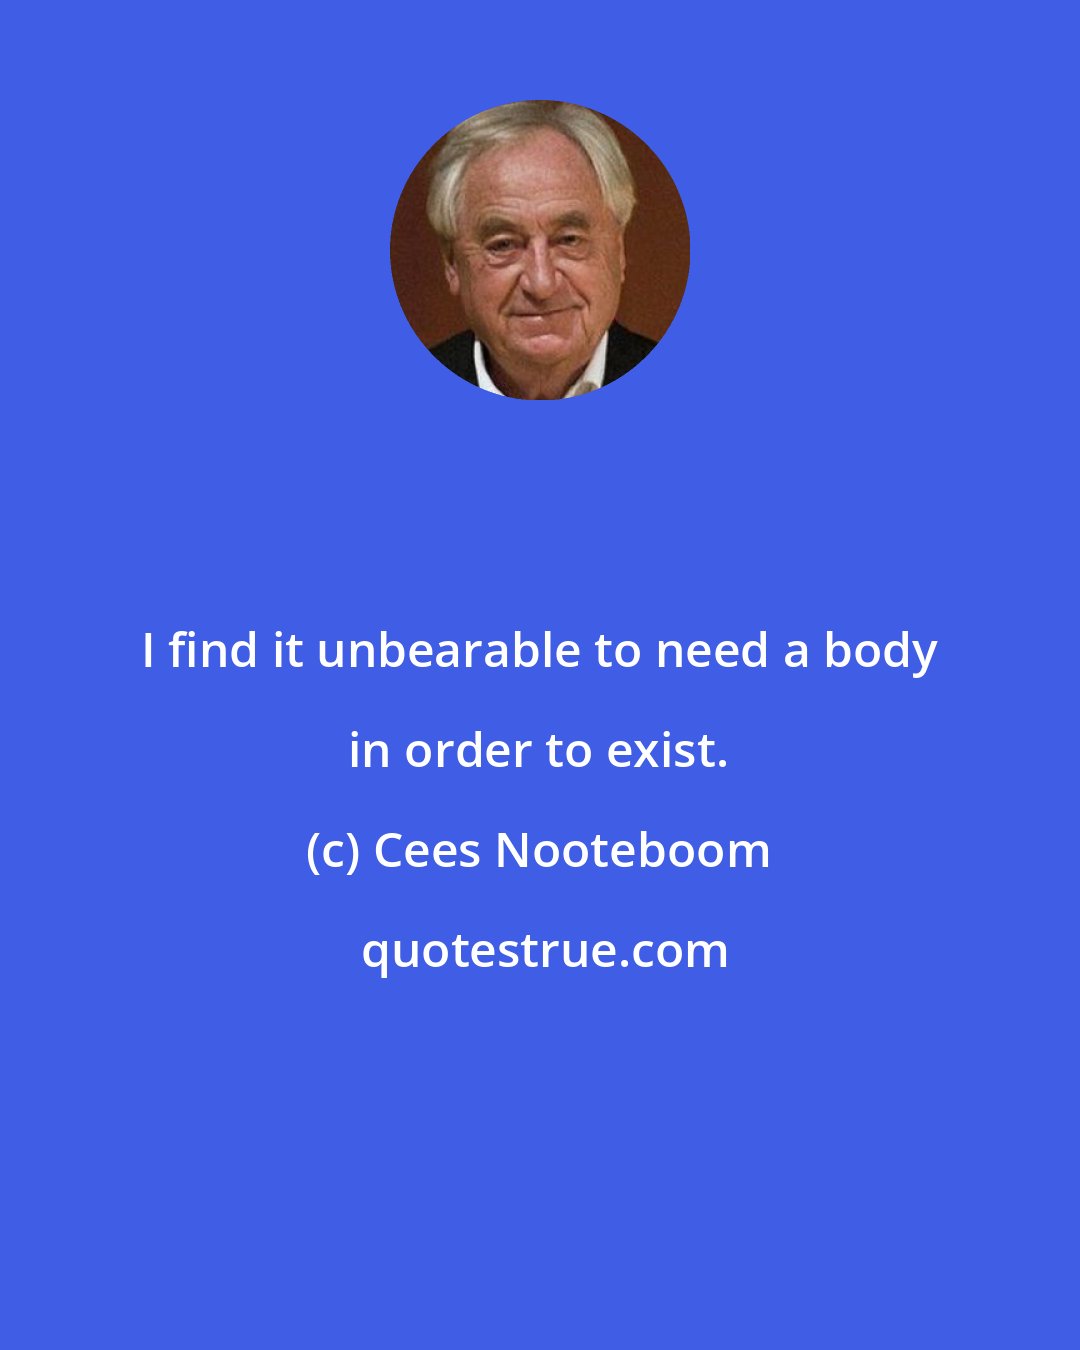 Cees Nooteboom: I find it unbearable to need a body in order to exist.